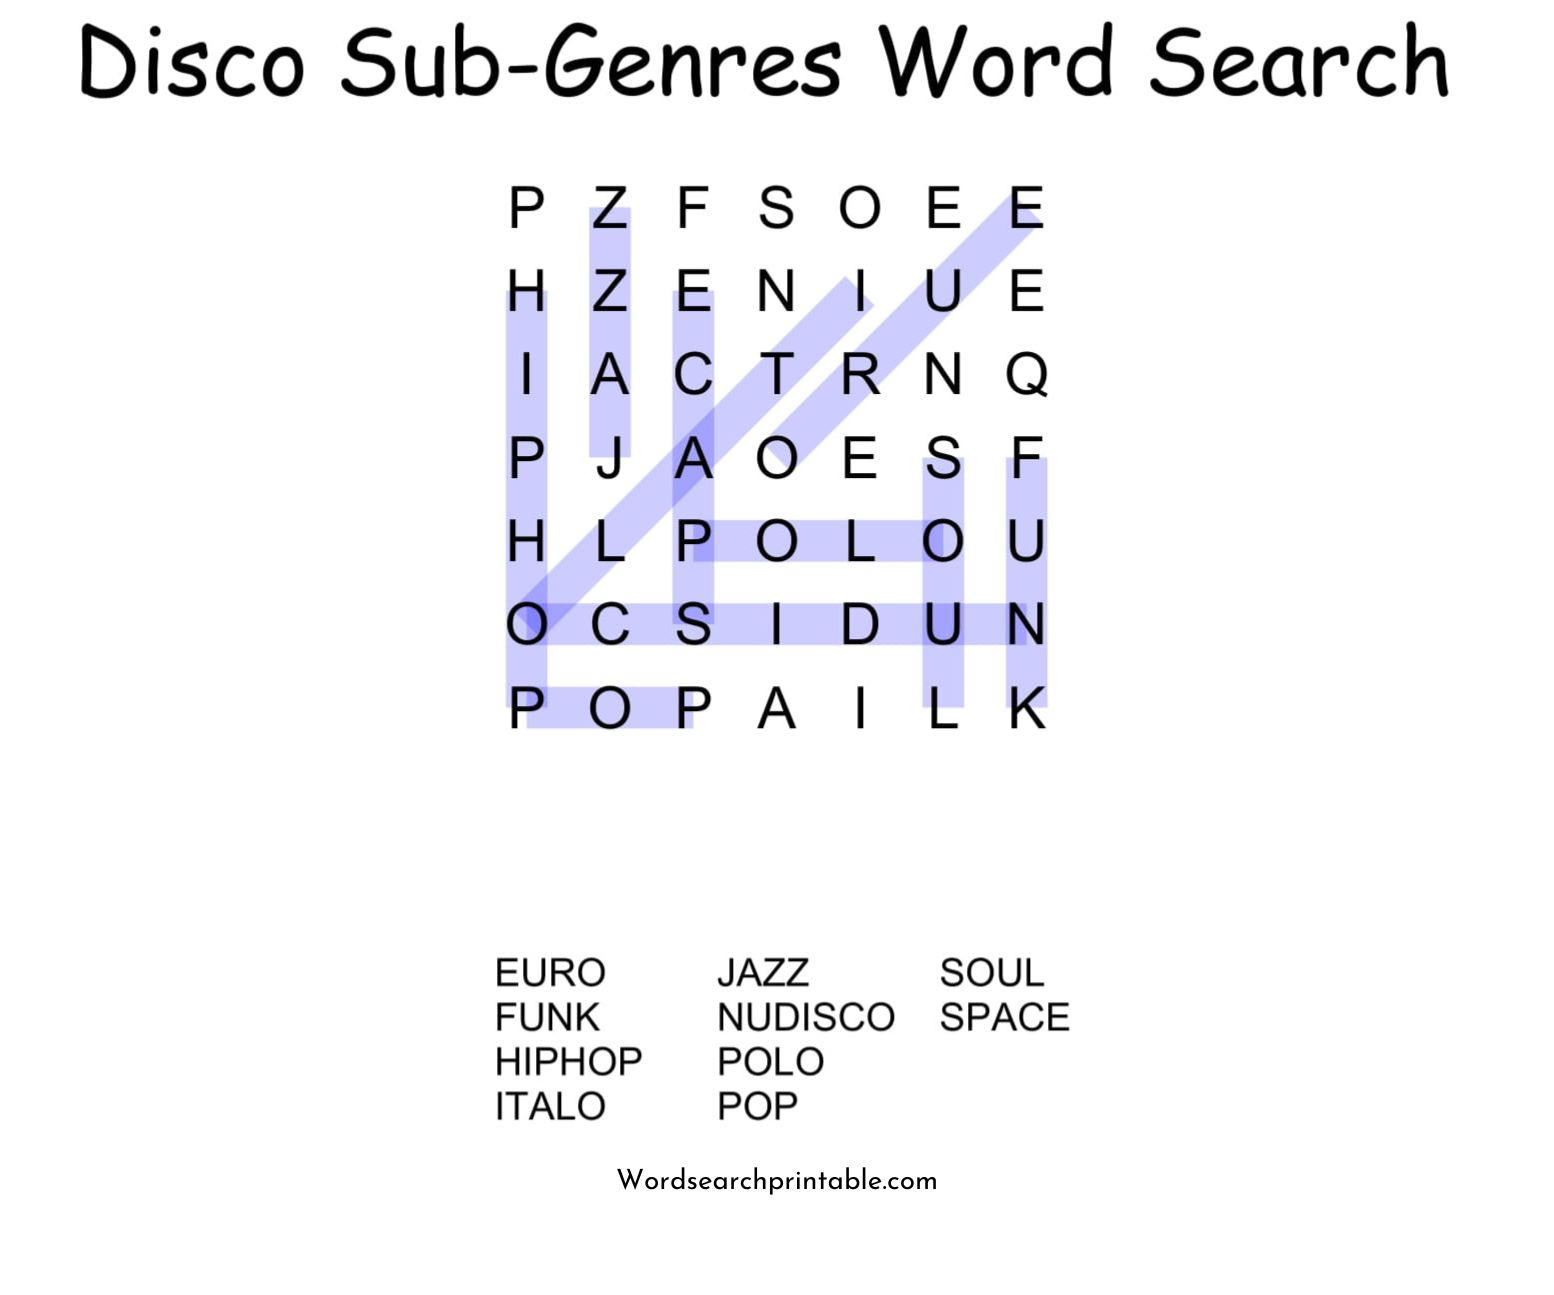 disco sub genres word search puzzle solution